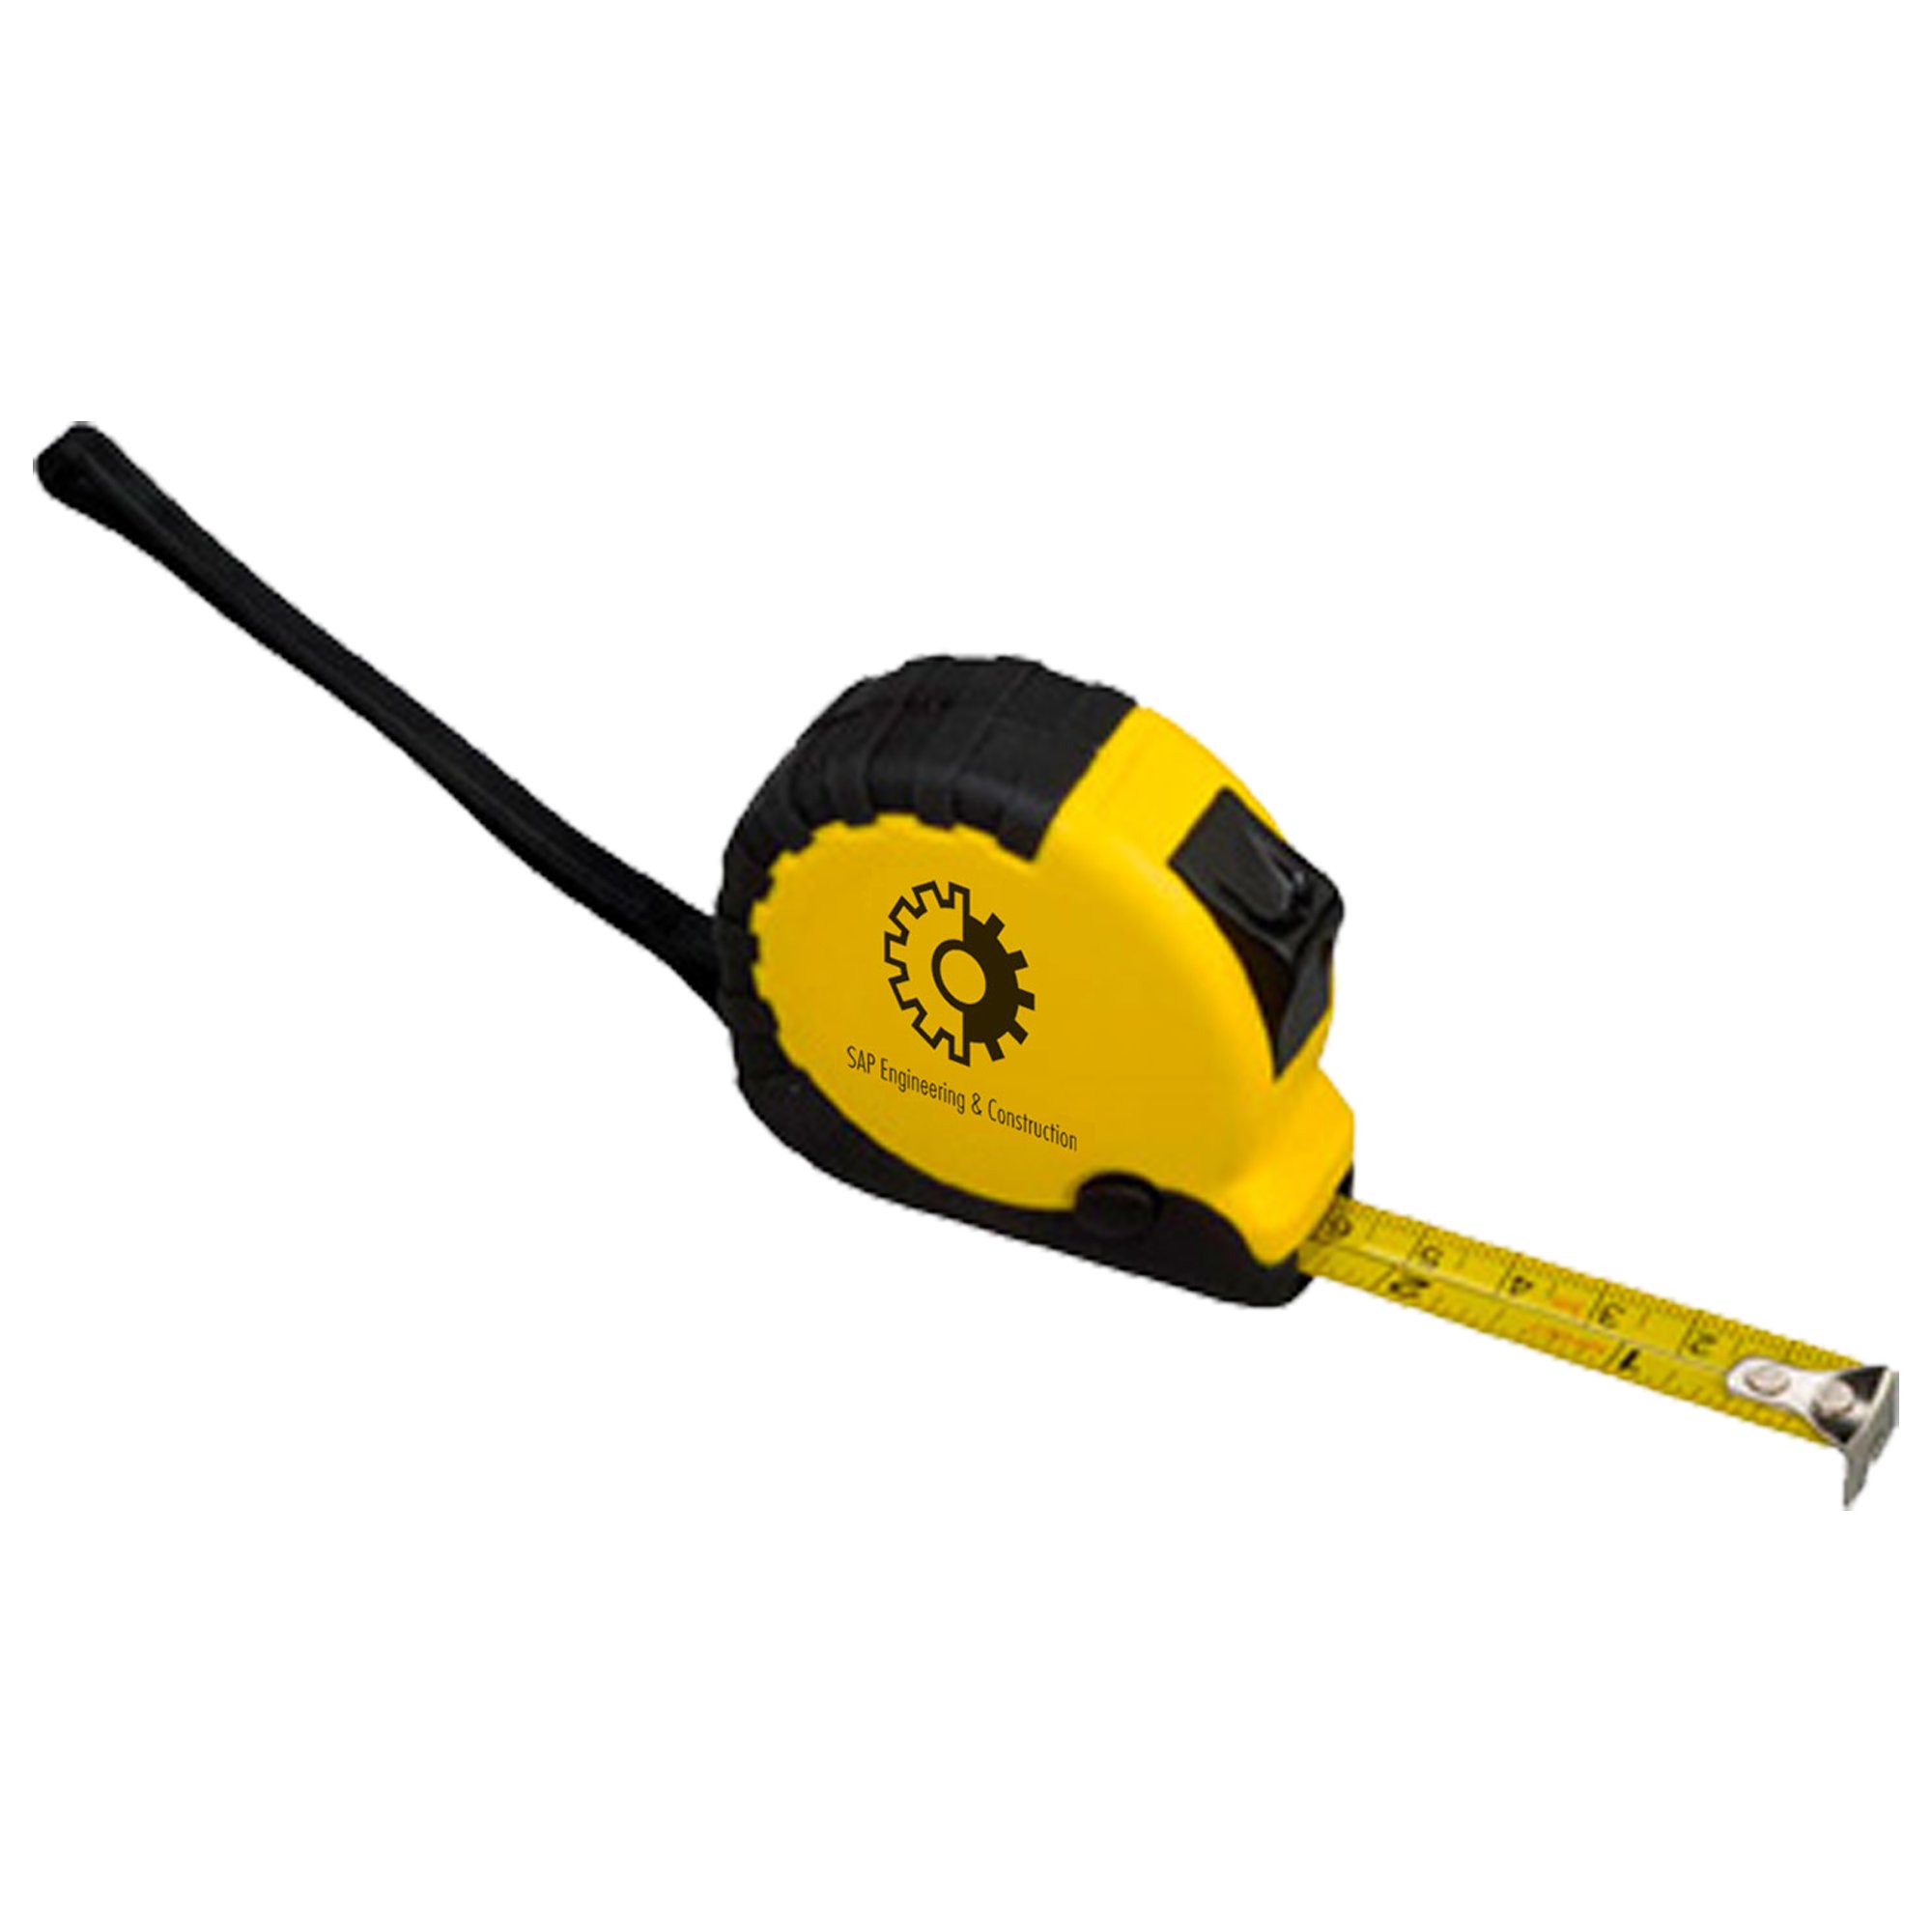 Be prepared with this reliable 10' metal tape measure. Characteristics include metric and inch ruler, strap belt clip, and slide release button.